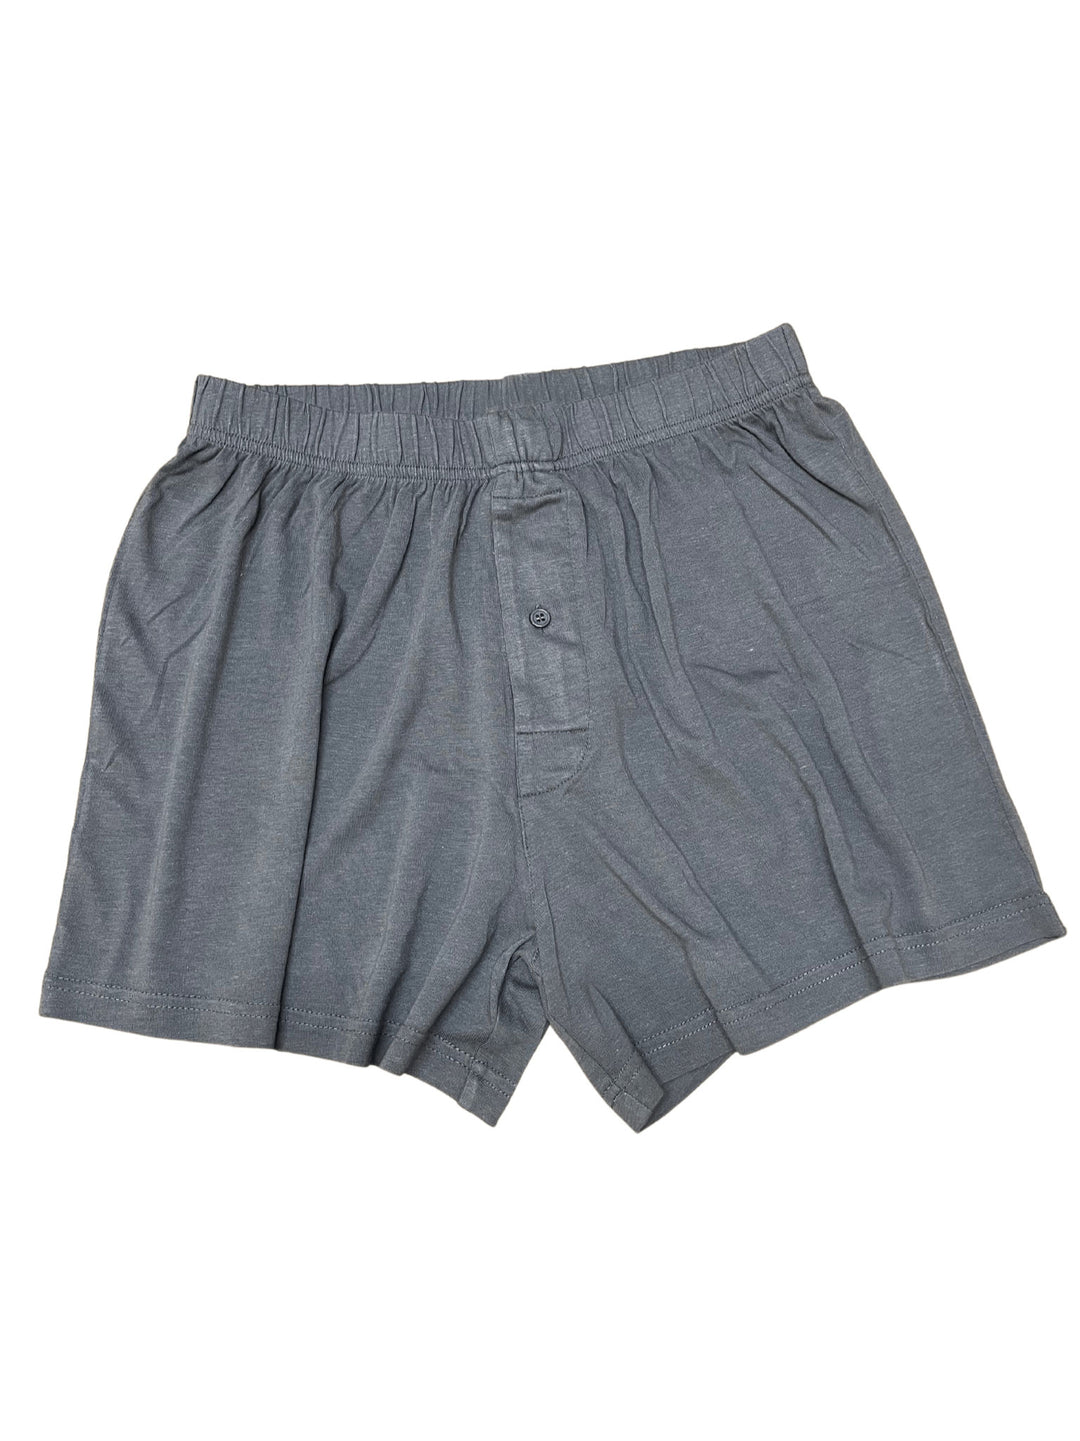 Men's Bamboo Viscose/Cotton Boxer Style Underwear Charcoal Grey Color - 5-pack